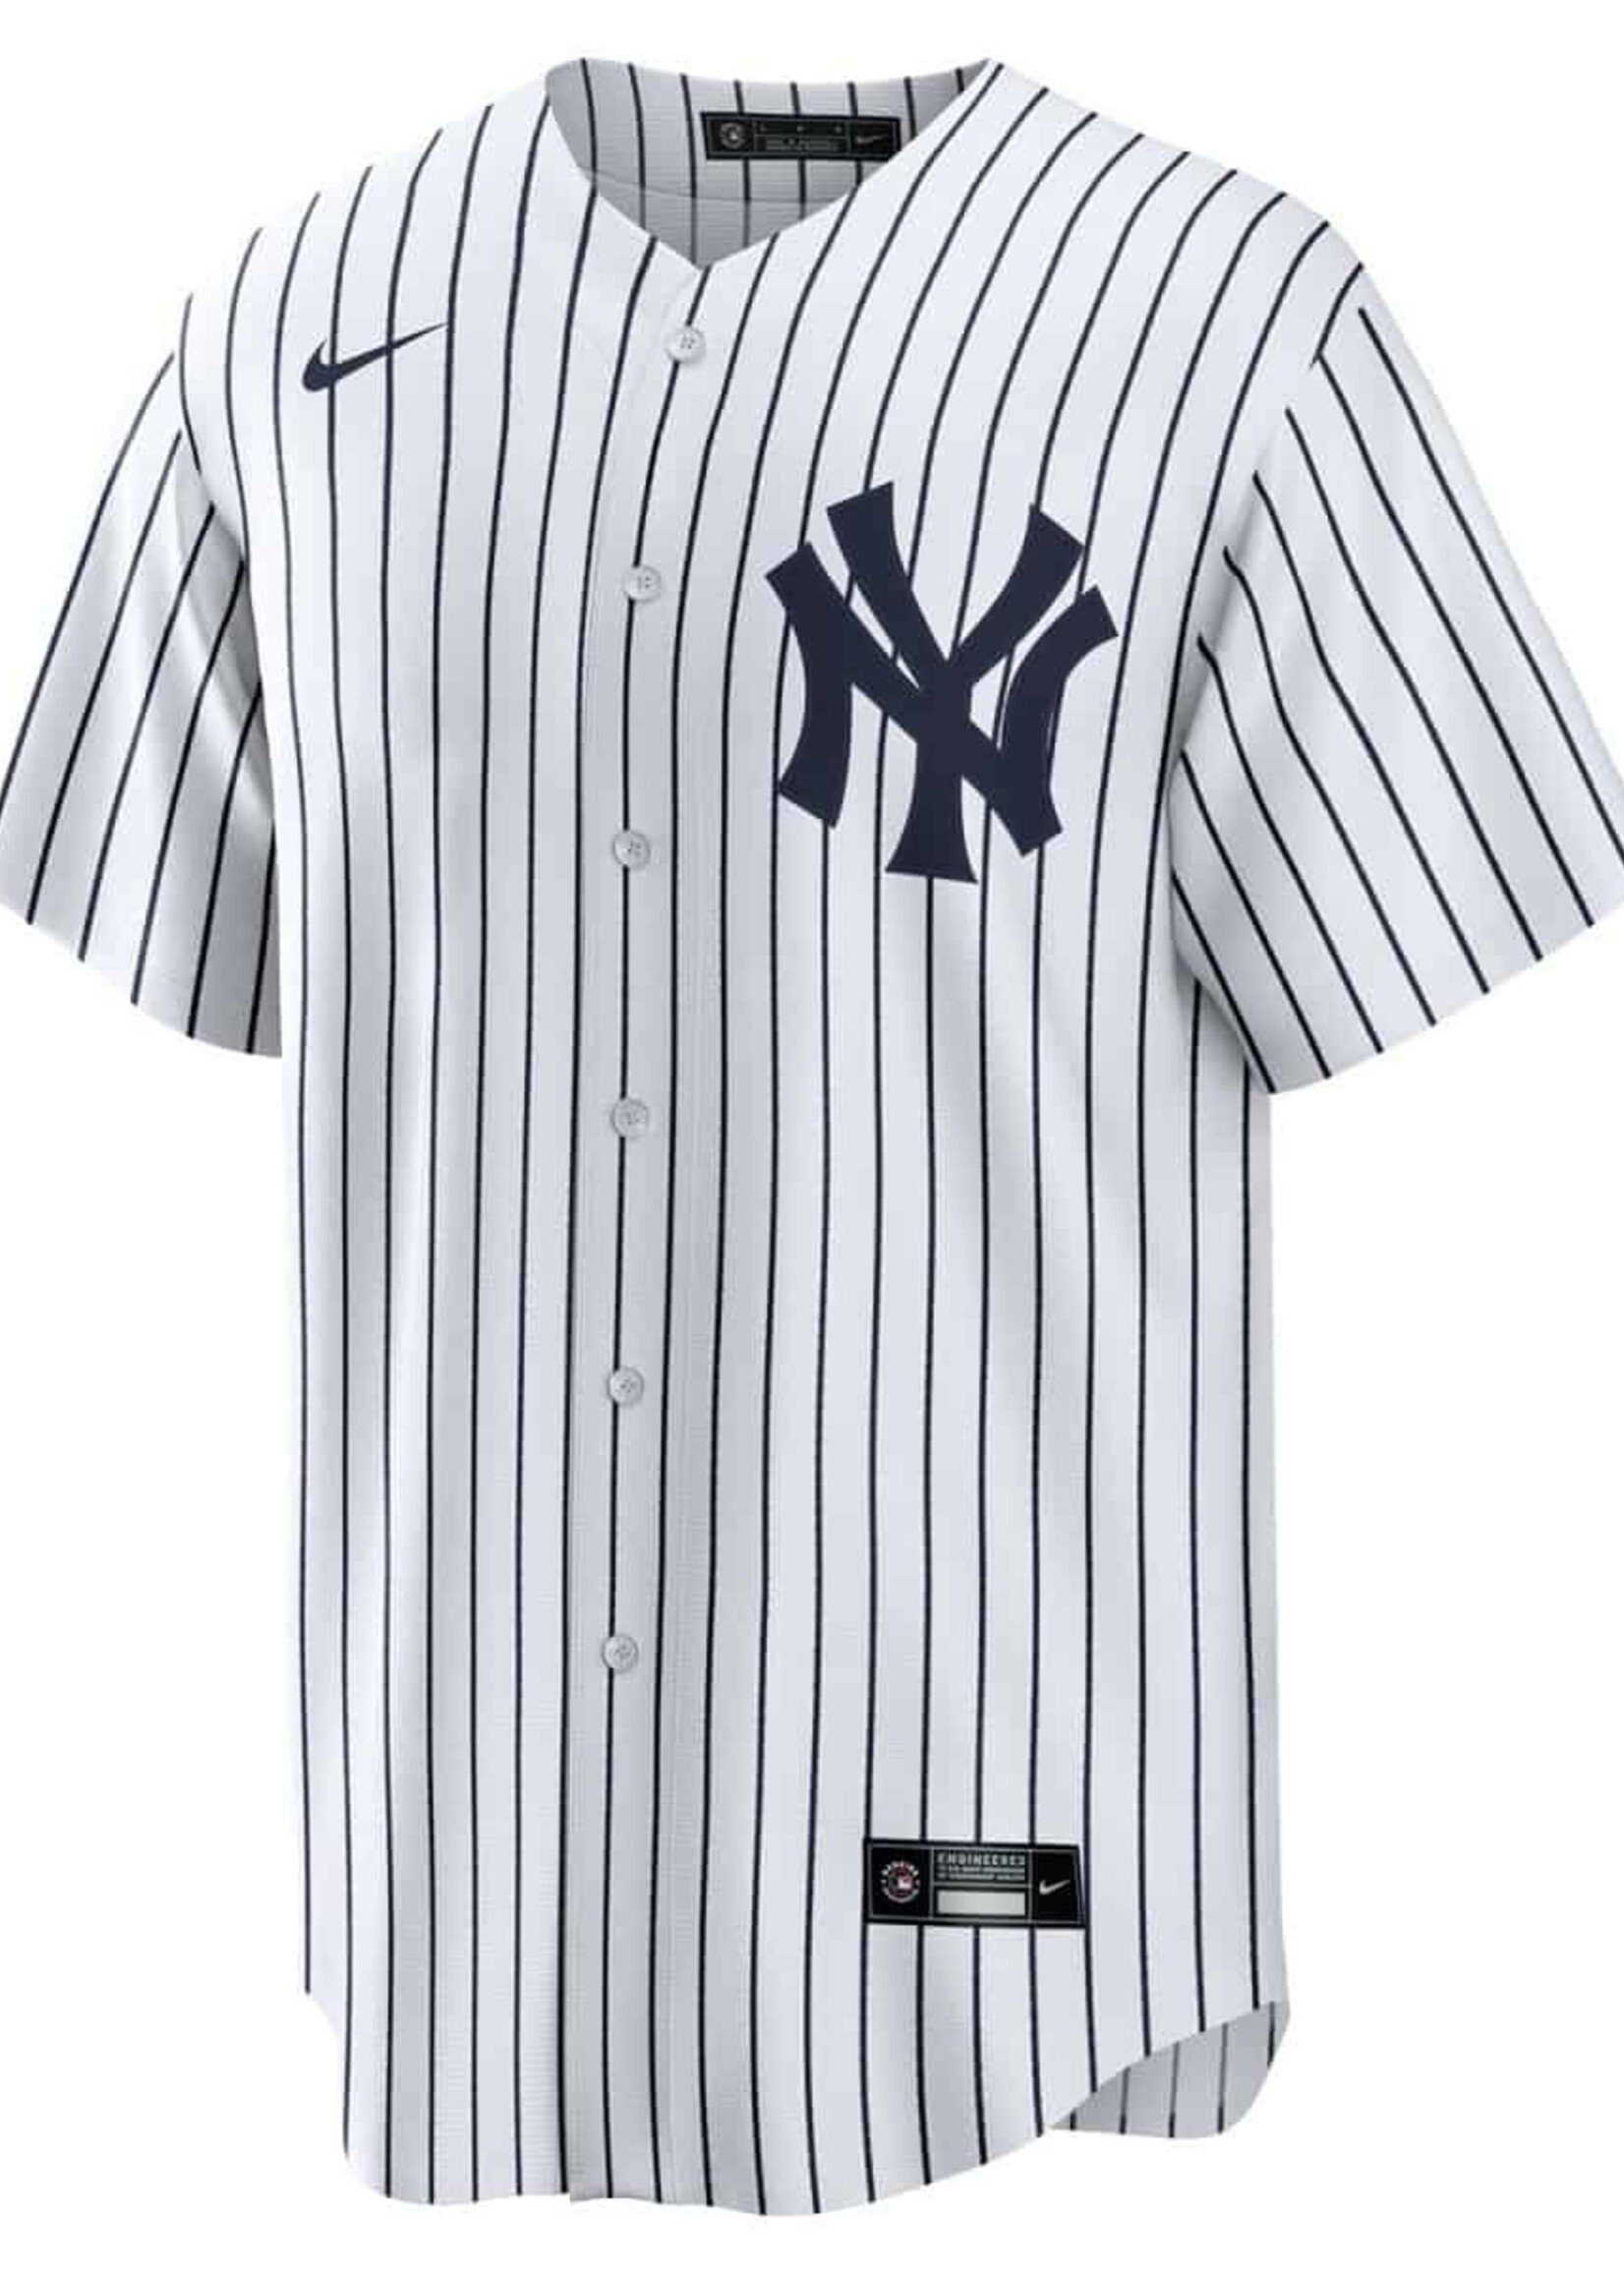 Nike New York Yankees Official Replica Home Jersey